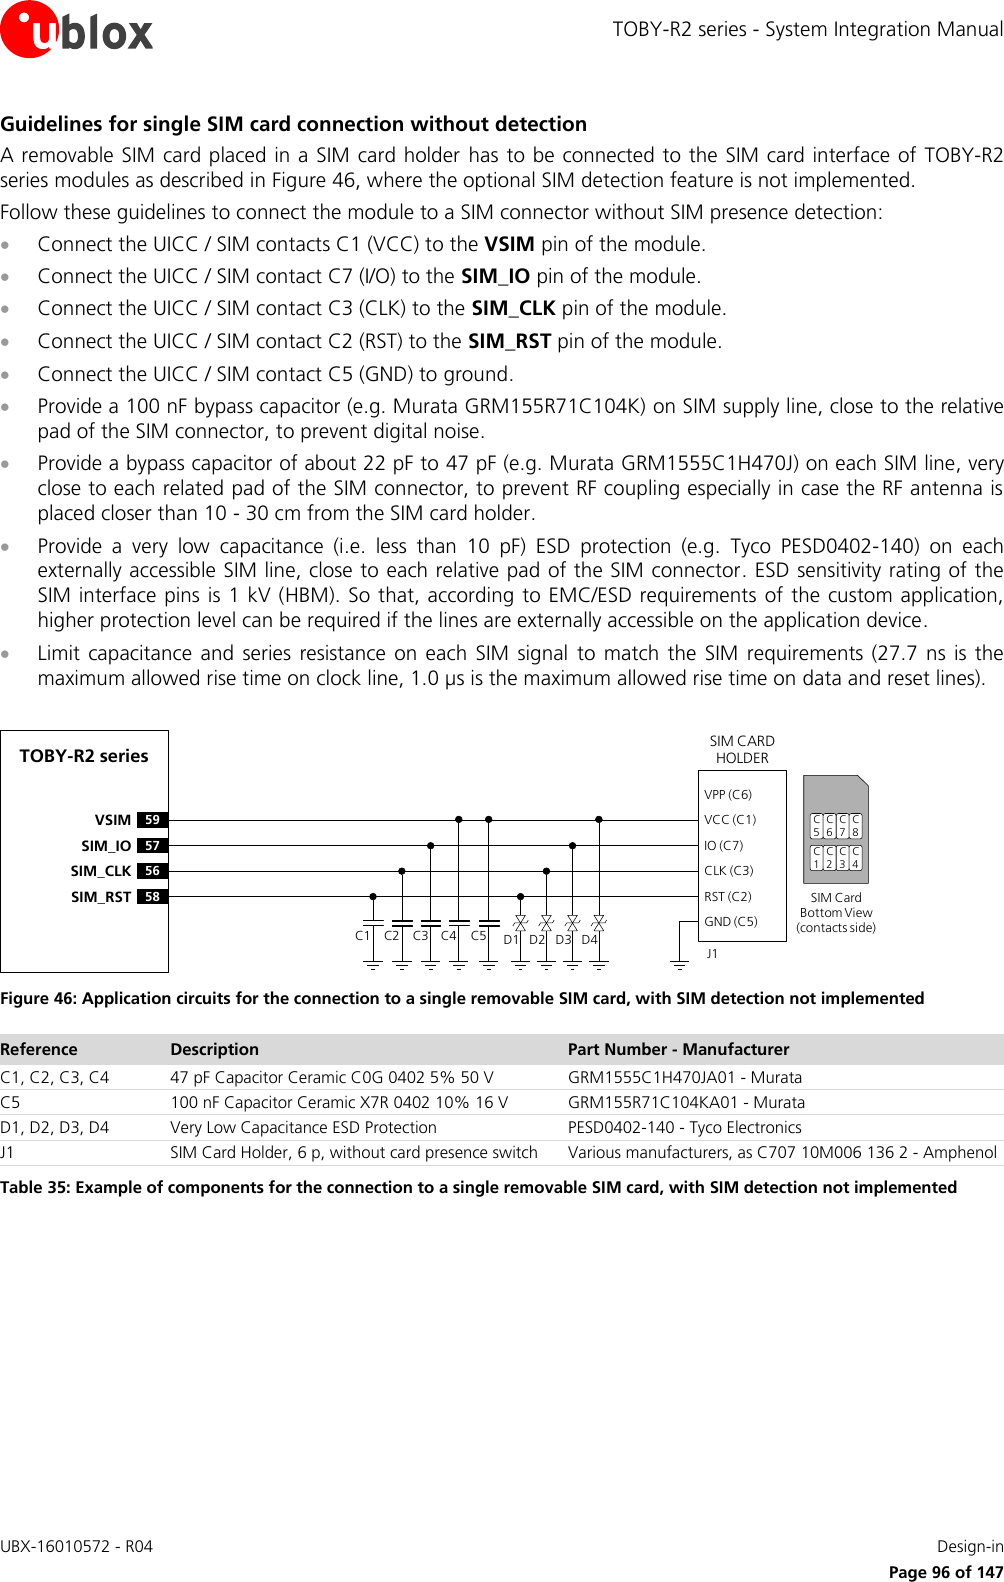 TOBY-R2 series - System Integration Manual UBX-16010572 - R04    Design-in     Page 96 of 147 Guidelines for single SIM card connection without detection A removable SIM card placed in a SIM card holder has to be connected to the SIM card interface of TOBY-R2 series modules as described in Figure 46, where the optional SIM detection feature is not implemented. Follow these guidelines to connect the module to a SIM connector without SIM presence detection:  Connect the UICC / SIM contacts C1 (VCC) to the VSIM pin of the module.  Connect the UICC / SIM contact C7 (I/O) to the SIM_IO pin of the module.  Connect the UICC / SIM contact C3 (CLK) to the SIM_CLK pin of the module.  Connect the UICC / SIM contact C2 (RST) to the SIM_RST pin of the module.  Connect the UICC / SIM contact C5 (GND) to ground.  Provide a 100 nF bypass capacitor (e.g. Murata GRM155R71C104K) on SIM supply line, close to the relative pad of the SIM connector, to prevent digital noise.  Provide a bypass capacitor of about 22 pF to 47 pF (e.g. Murata GRM1555C1H470J) on each SIM line, very close to each related pad of the SIM connector, to prevent RF coupling especially in case the RF antenna is placed closer than 10 - 30 cm from the SIM card holder.  Provide  a  very  low  capacitance  (i.e.  less  than  10  pF)  ESD  protection  (e.g.  Tyco  PESD0402-140)  on  each externally accessible SIM line, close to each relative pad of the SIM connector. ESD sensitivity rating of the SIM interface pins is 1 kV (HBM). So that, according to EMC/ESD requirements of the custom application, higher protection level can be required if the lines are externally accessible on the application device.  Limit capacitance  and  series resistance  on each  SIM  signal  to match  the  SIM  requirements  (27.7  ns is the maximum allowed rise time on clock line, 1.0 µs is the maximum allowed rise time on data and reset lines).  TOBY-R2 series59VSIM57SIM_IO56SIM_CLK58SIM_RSTSIM CARD HOLDERC5C6C7C1C2C3SIM Card Bottom View (contacts side)C1VPP (C6)VCC (C1)IO (C7)CLK (C3)RST (C2)GND (C5)C2 C3 C5J1C4 D1 D2 D3 D4C8C4 Figure 46: Application circuits for the connection to a single removable SIM card, with SIM detection not implemented Reference Description Part Number - Manufacturer C1, C2, C3, C4 47 pF Capacitor Ceramic C0G 0402 5% 50 V GRM1555C1H470JA01 - Murata C5 100 nF Capacitor Ceramic X7R 0402 10% 16 V GRM155R71C104KA01 - Murata D1, D2, D3, D4 Very Low Capacitance ESD Protection PESD0402-140 - Tyco Electronics  J1 SIM Card Holder, 6 p, without card presence switch Various manufacturers, as C707 10M006 136 2 - Amphenol Table 35: Example of components for the connection to a single removable SIM card, with SIM detection not implemented  